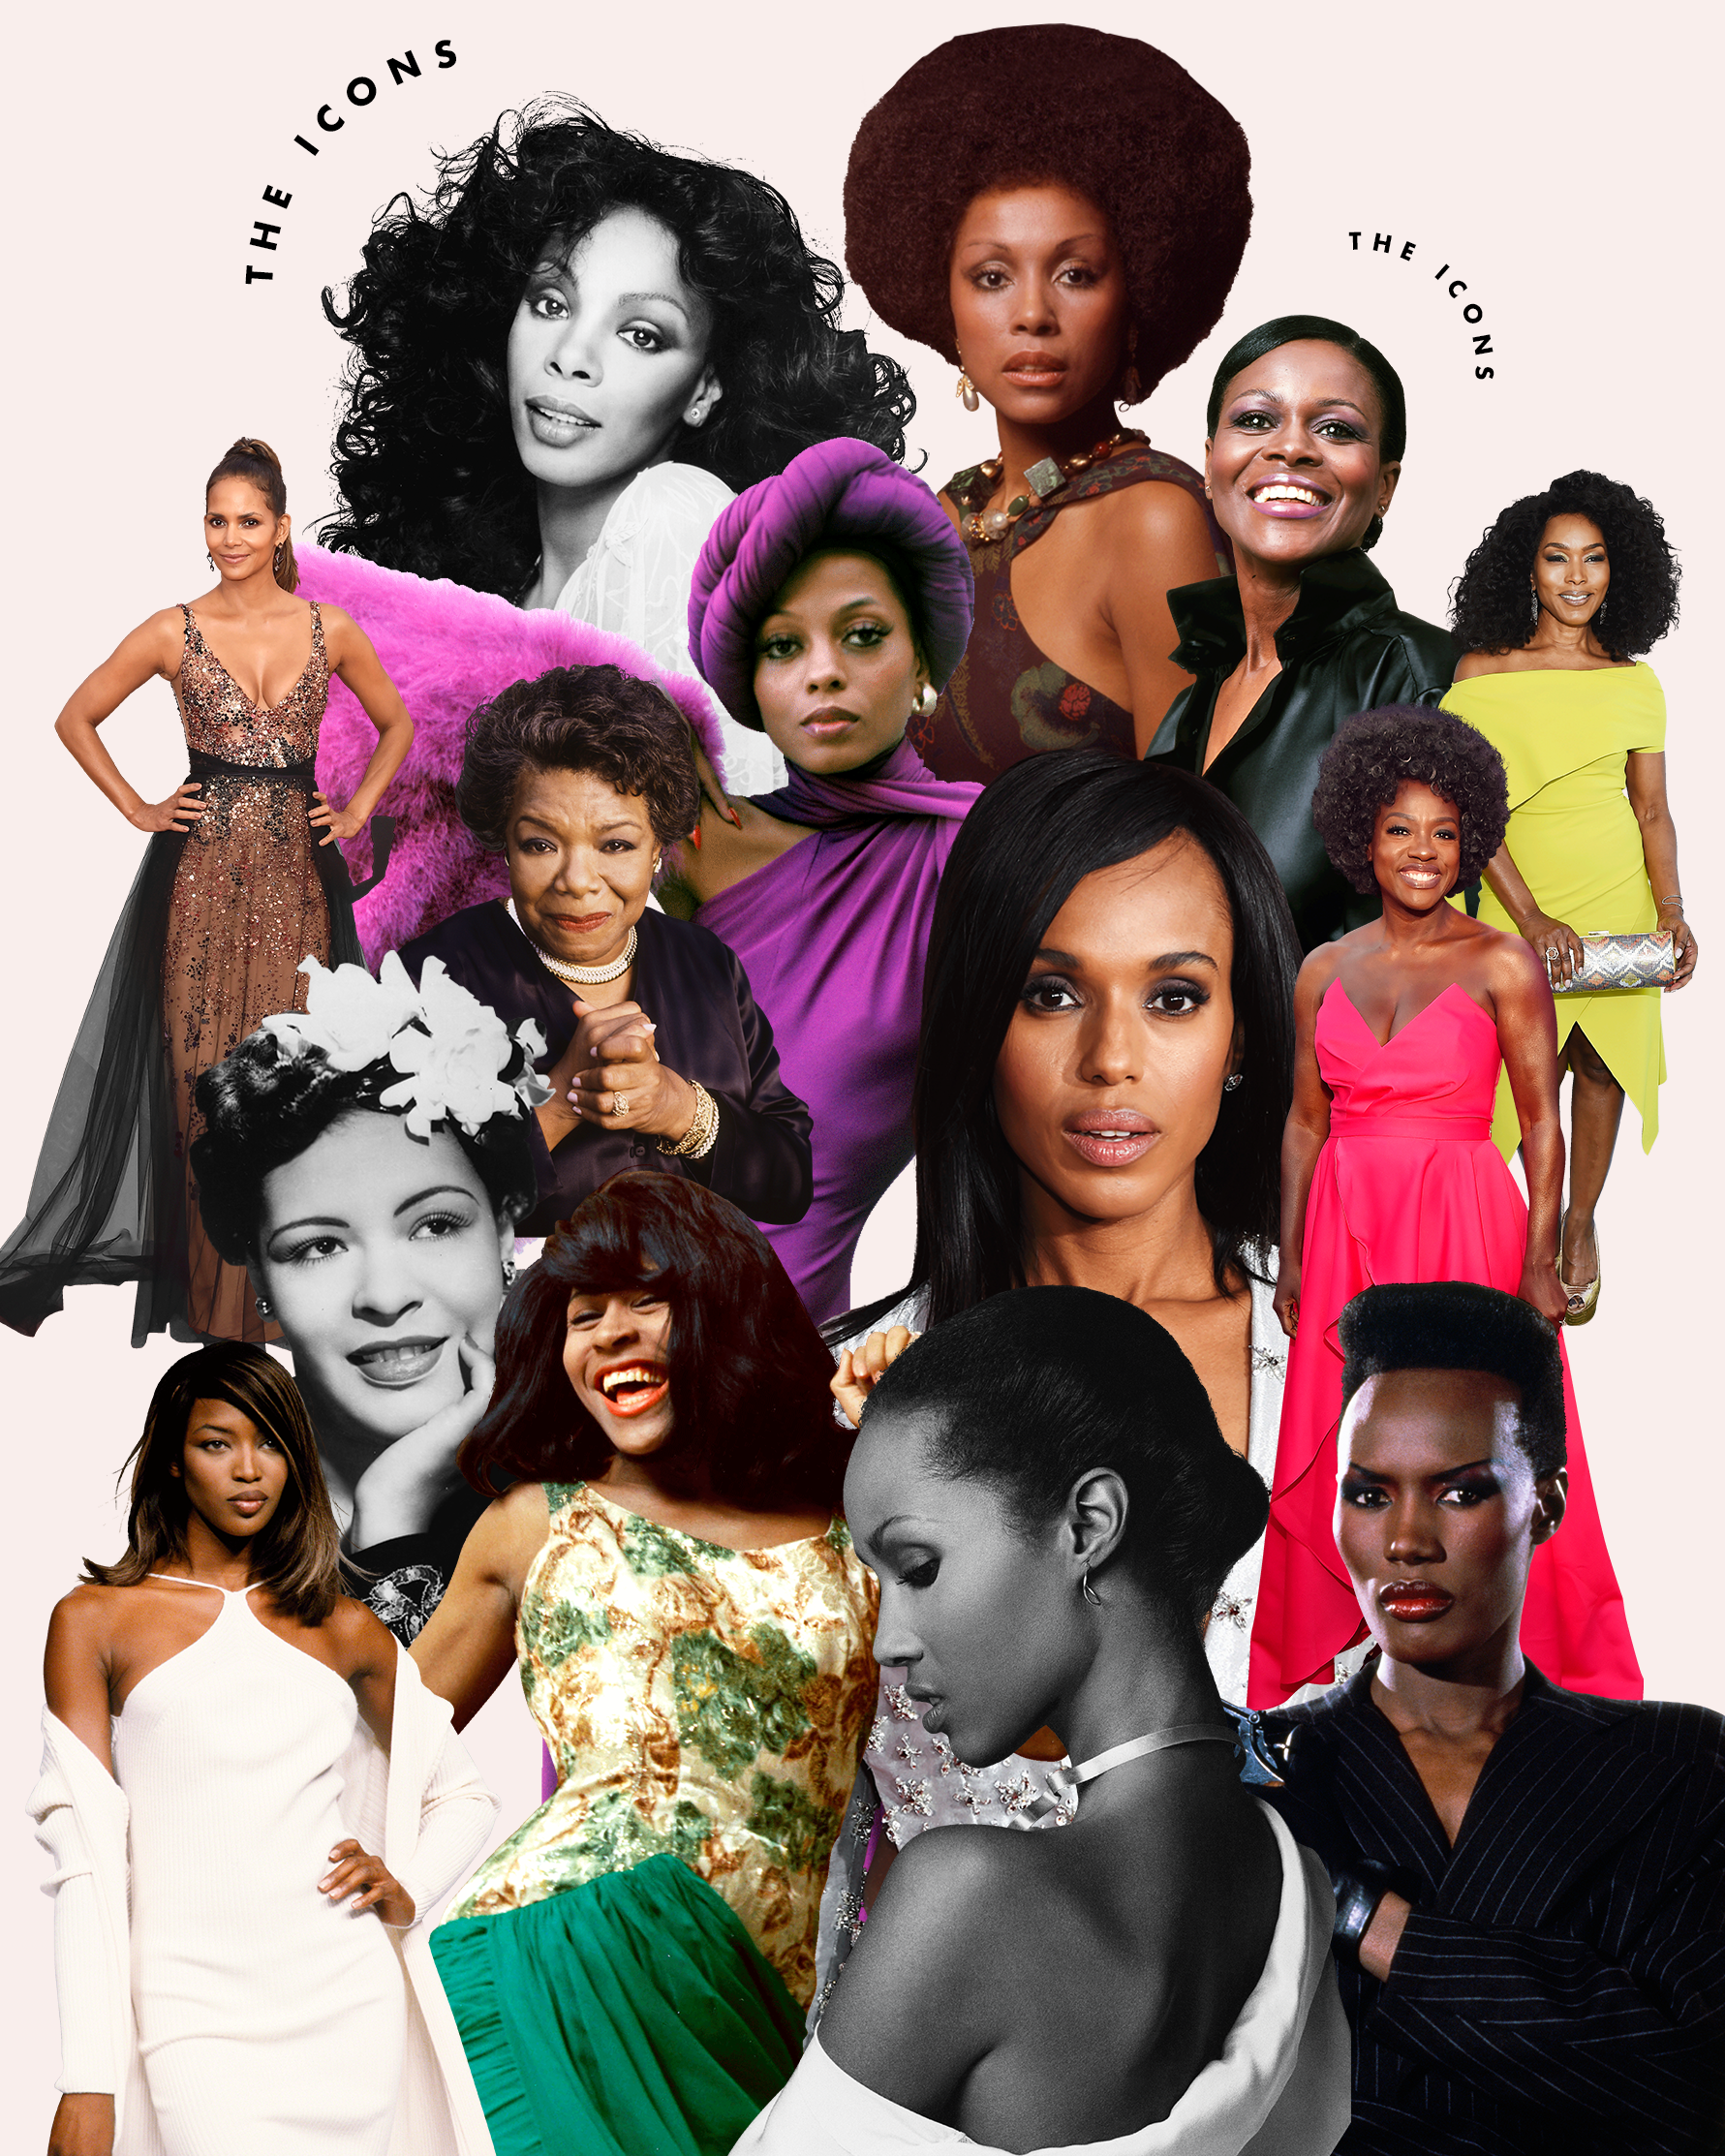 What Everyone Can Learn About Beauty From Black Women